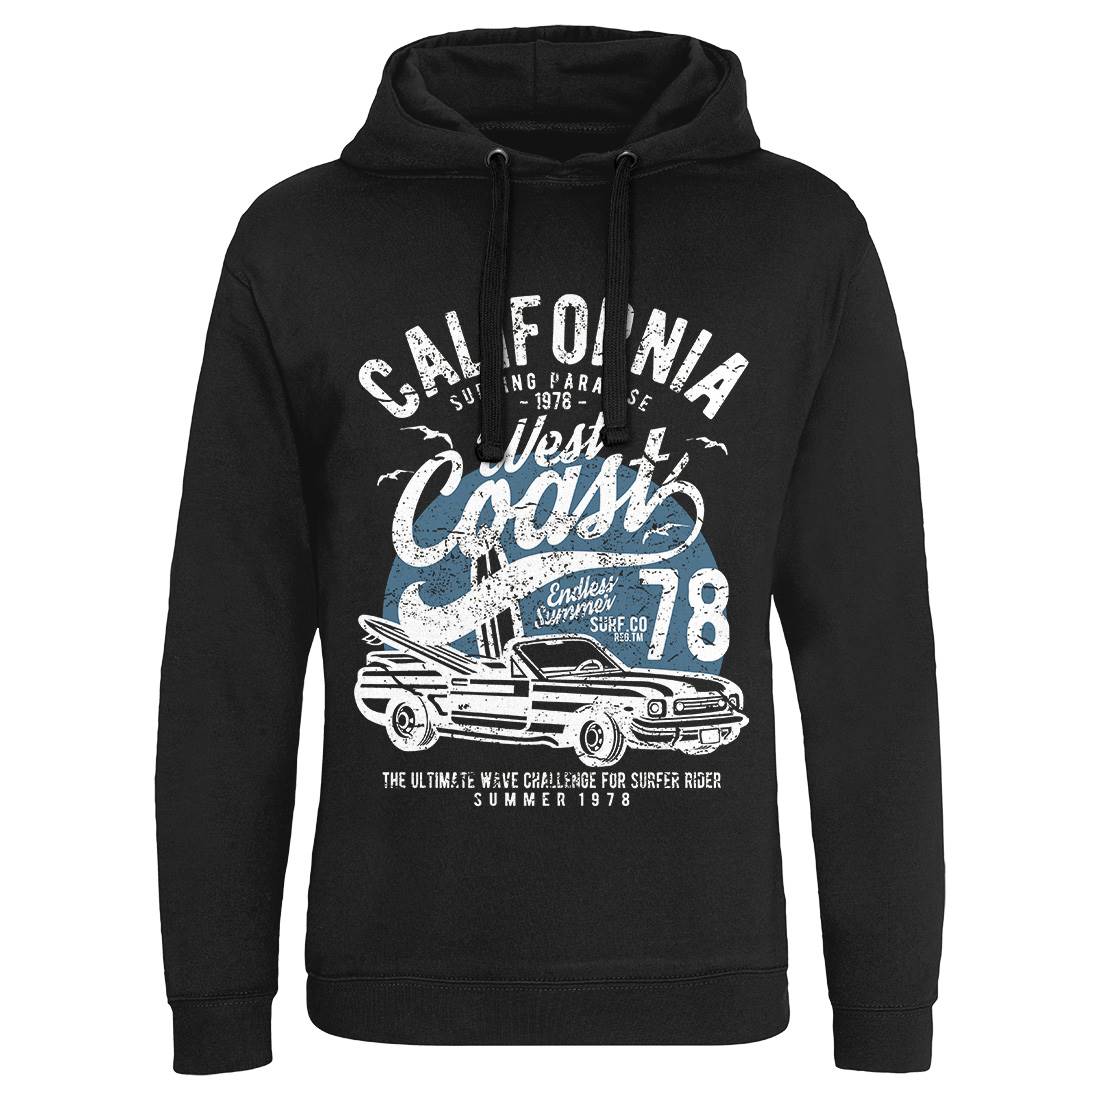 California West Coast Mens Hoodie Without Pocket Nature A028